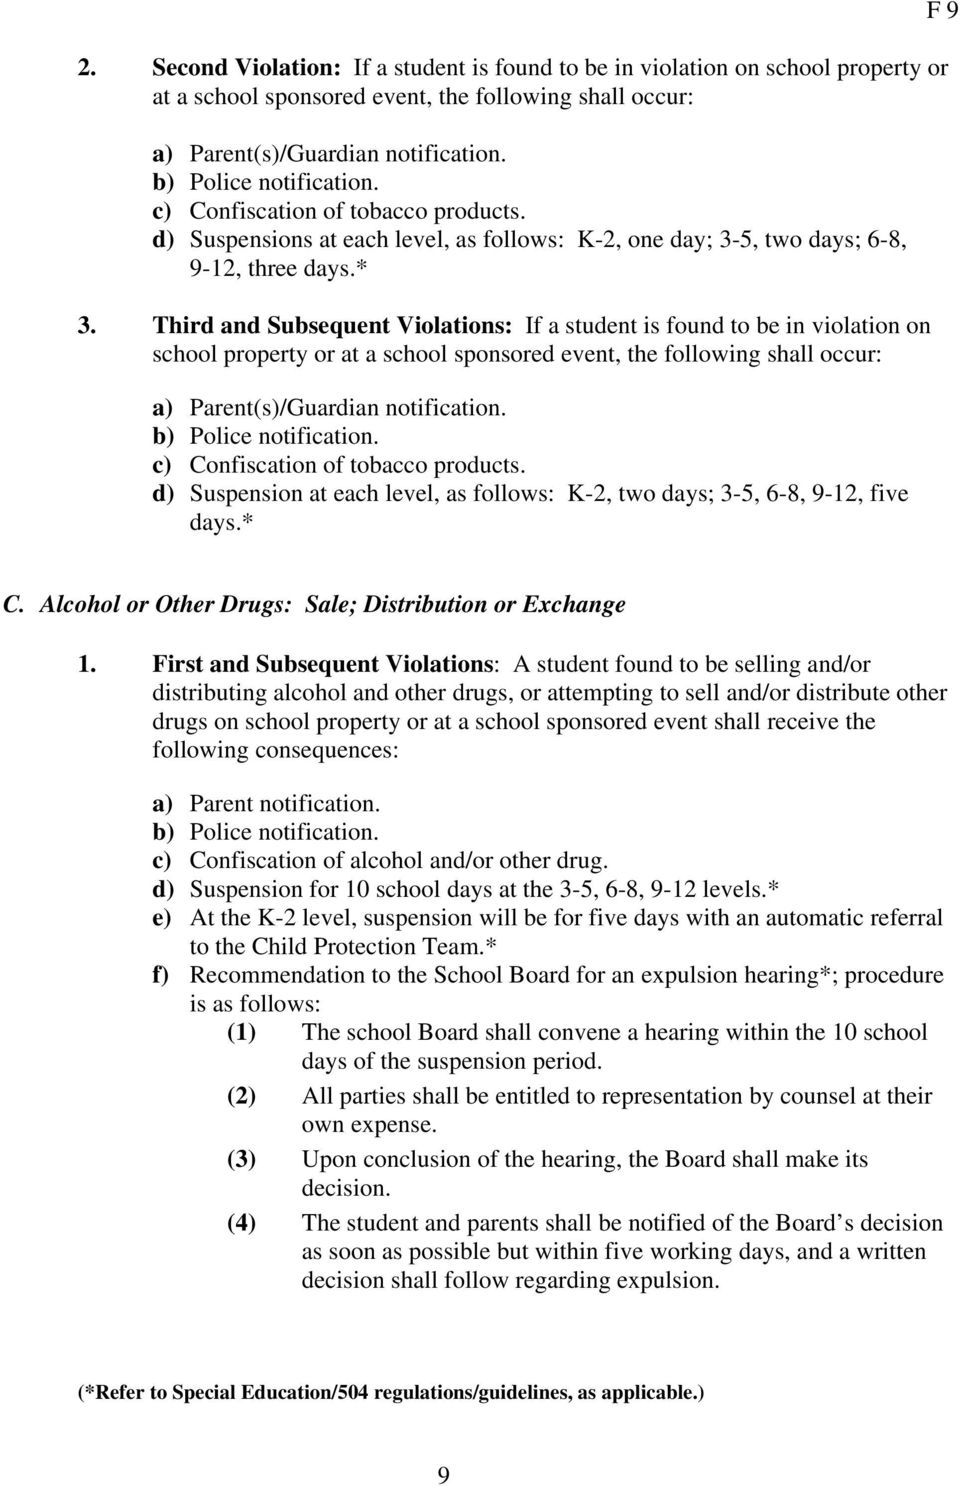 Third and Subsequent Violations: If a student is found to be in violation on school property or at a school sponsored event, the following shall occur: d) Suspension at each level, as follows: K-2,